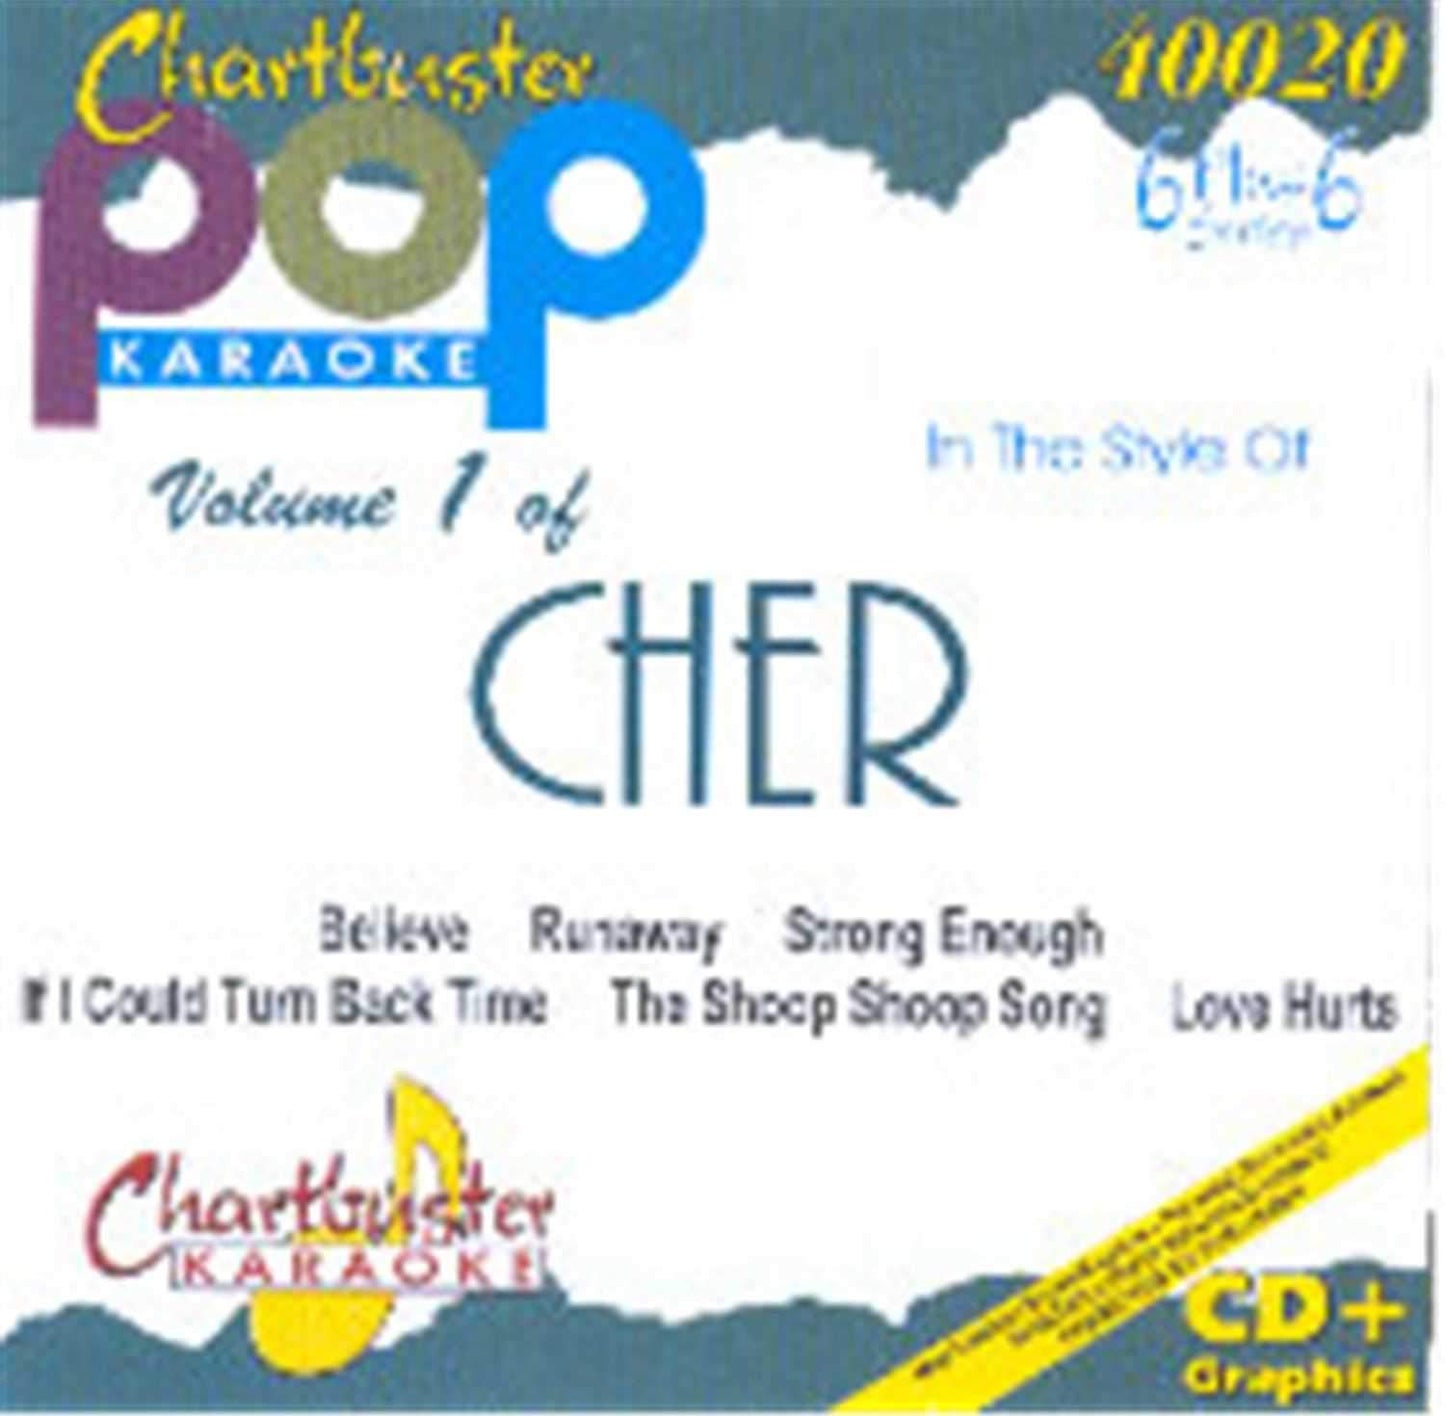 Chartbuster Karaoke Artist Cher - ProSound and Stage Lighting